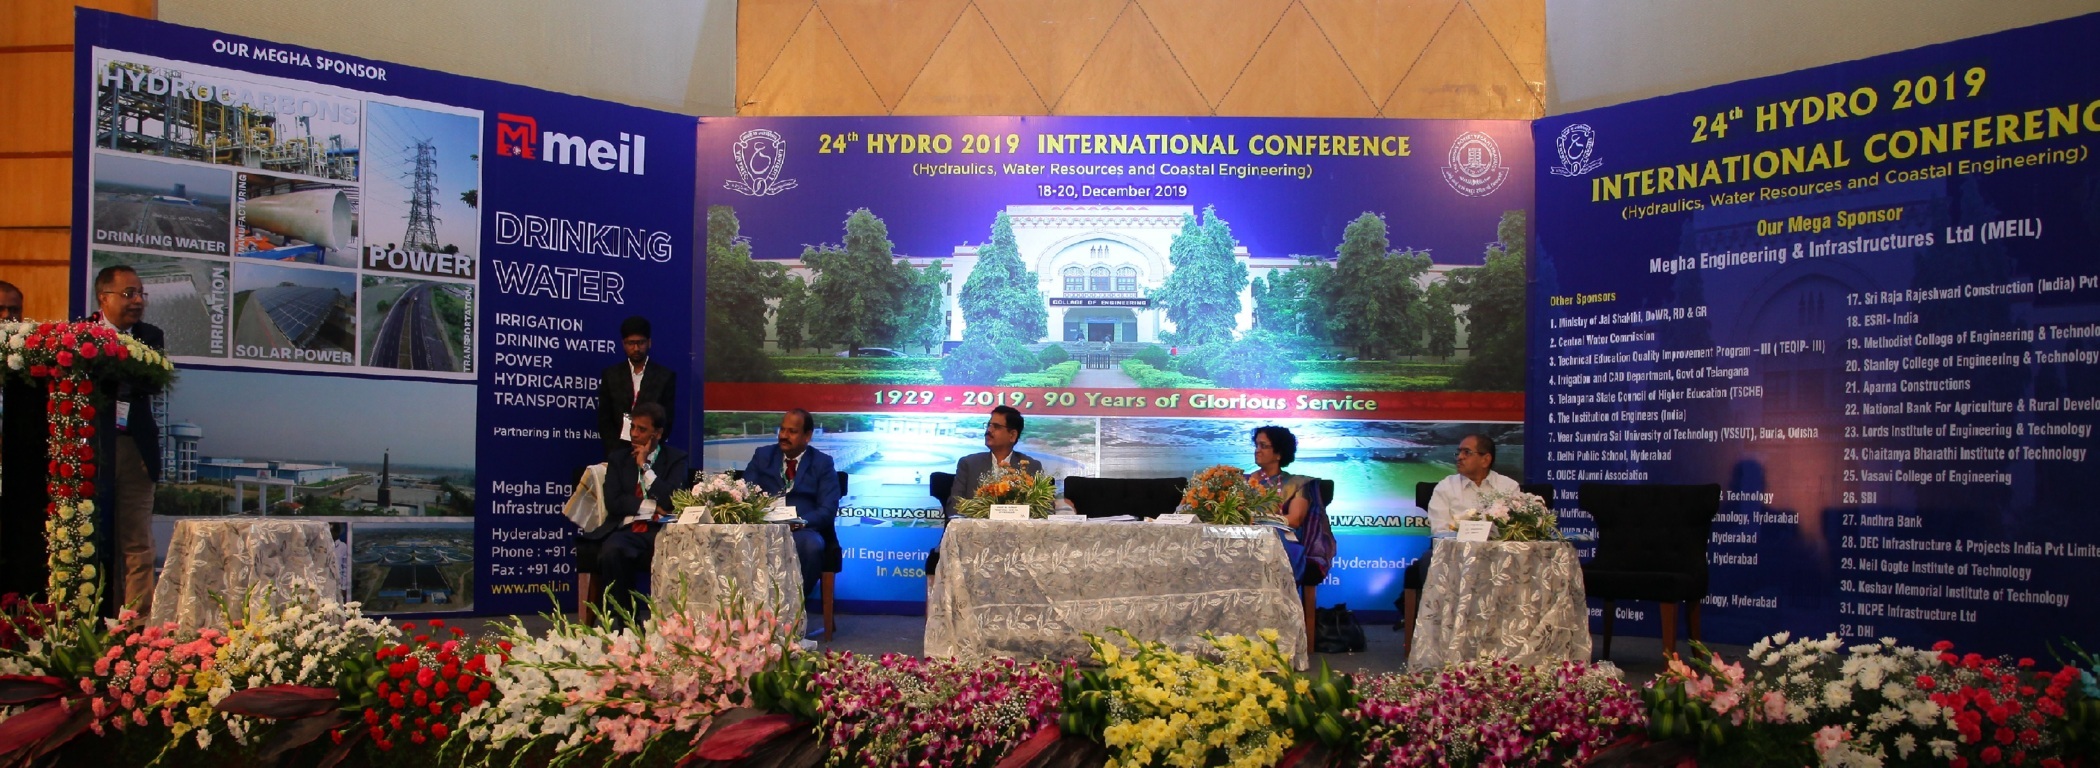 International Symposium of Hydraulic Structures at IIT Roorkee